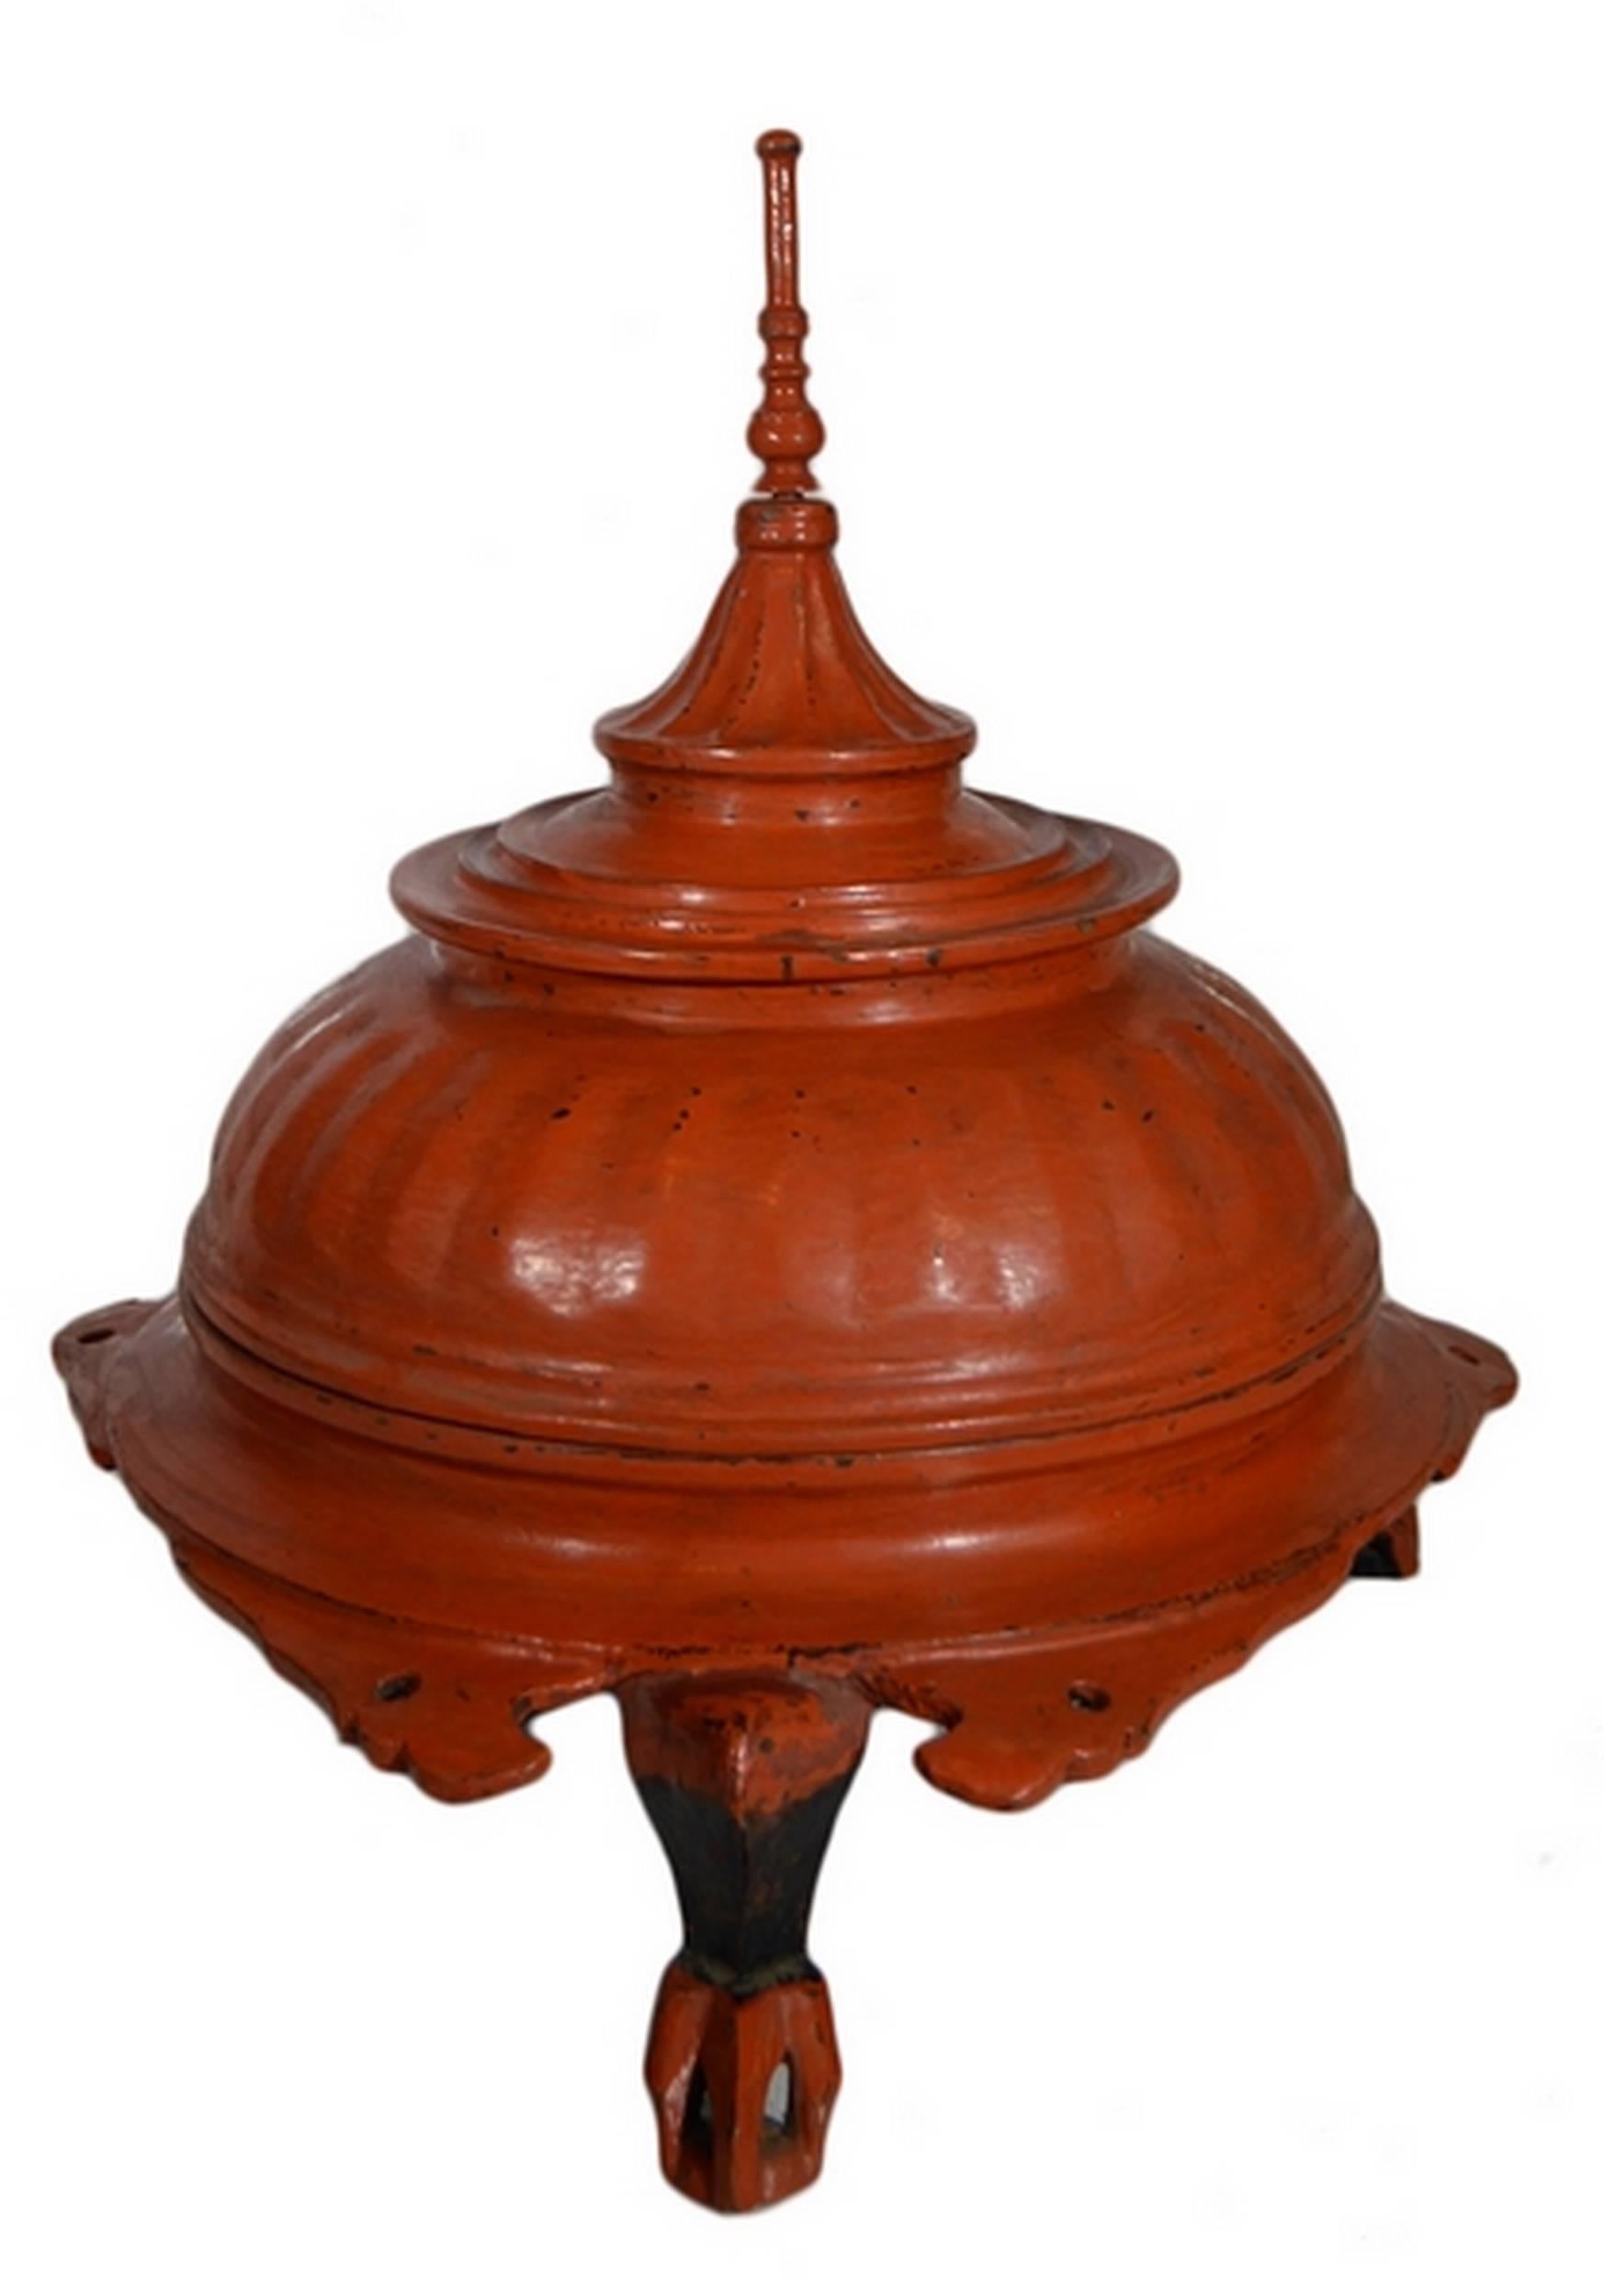 A 19th century Burmese offering basket made of carved wood painted red. This round basket displays a three-legged base with detailed carvings on the edge. The lid adopts a Burmese temple shape, with a sharp top surmounting a gadroon dome. The whole